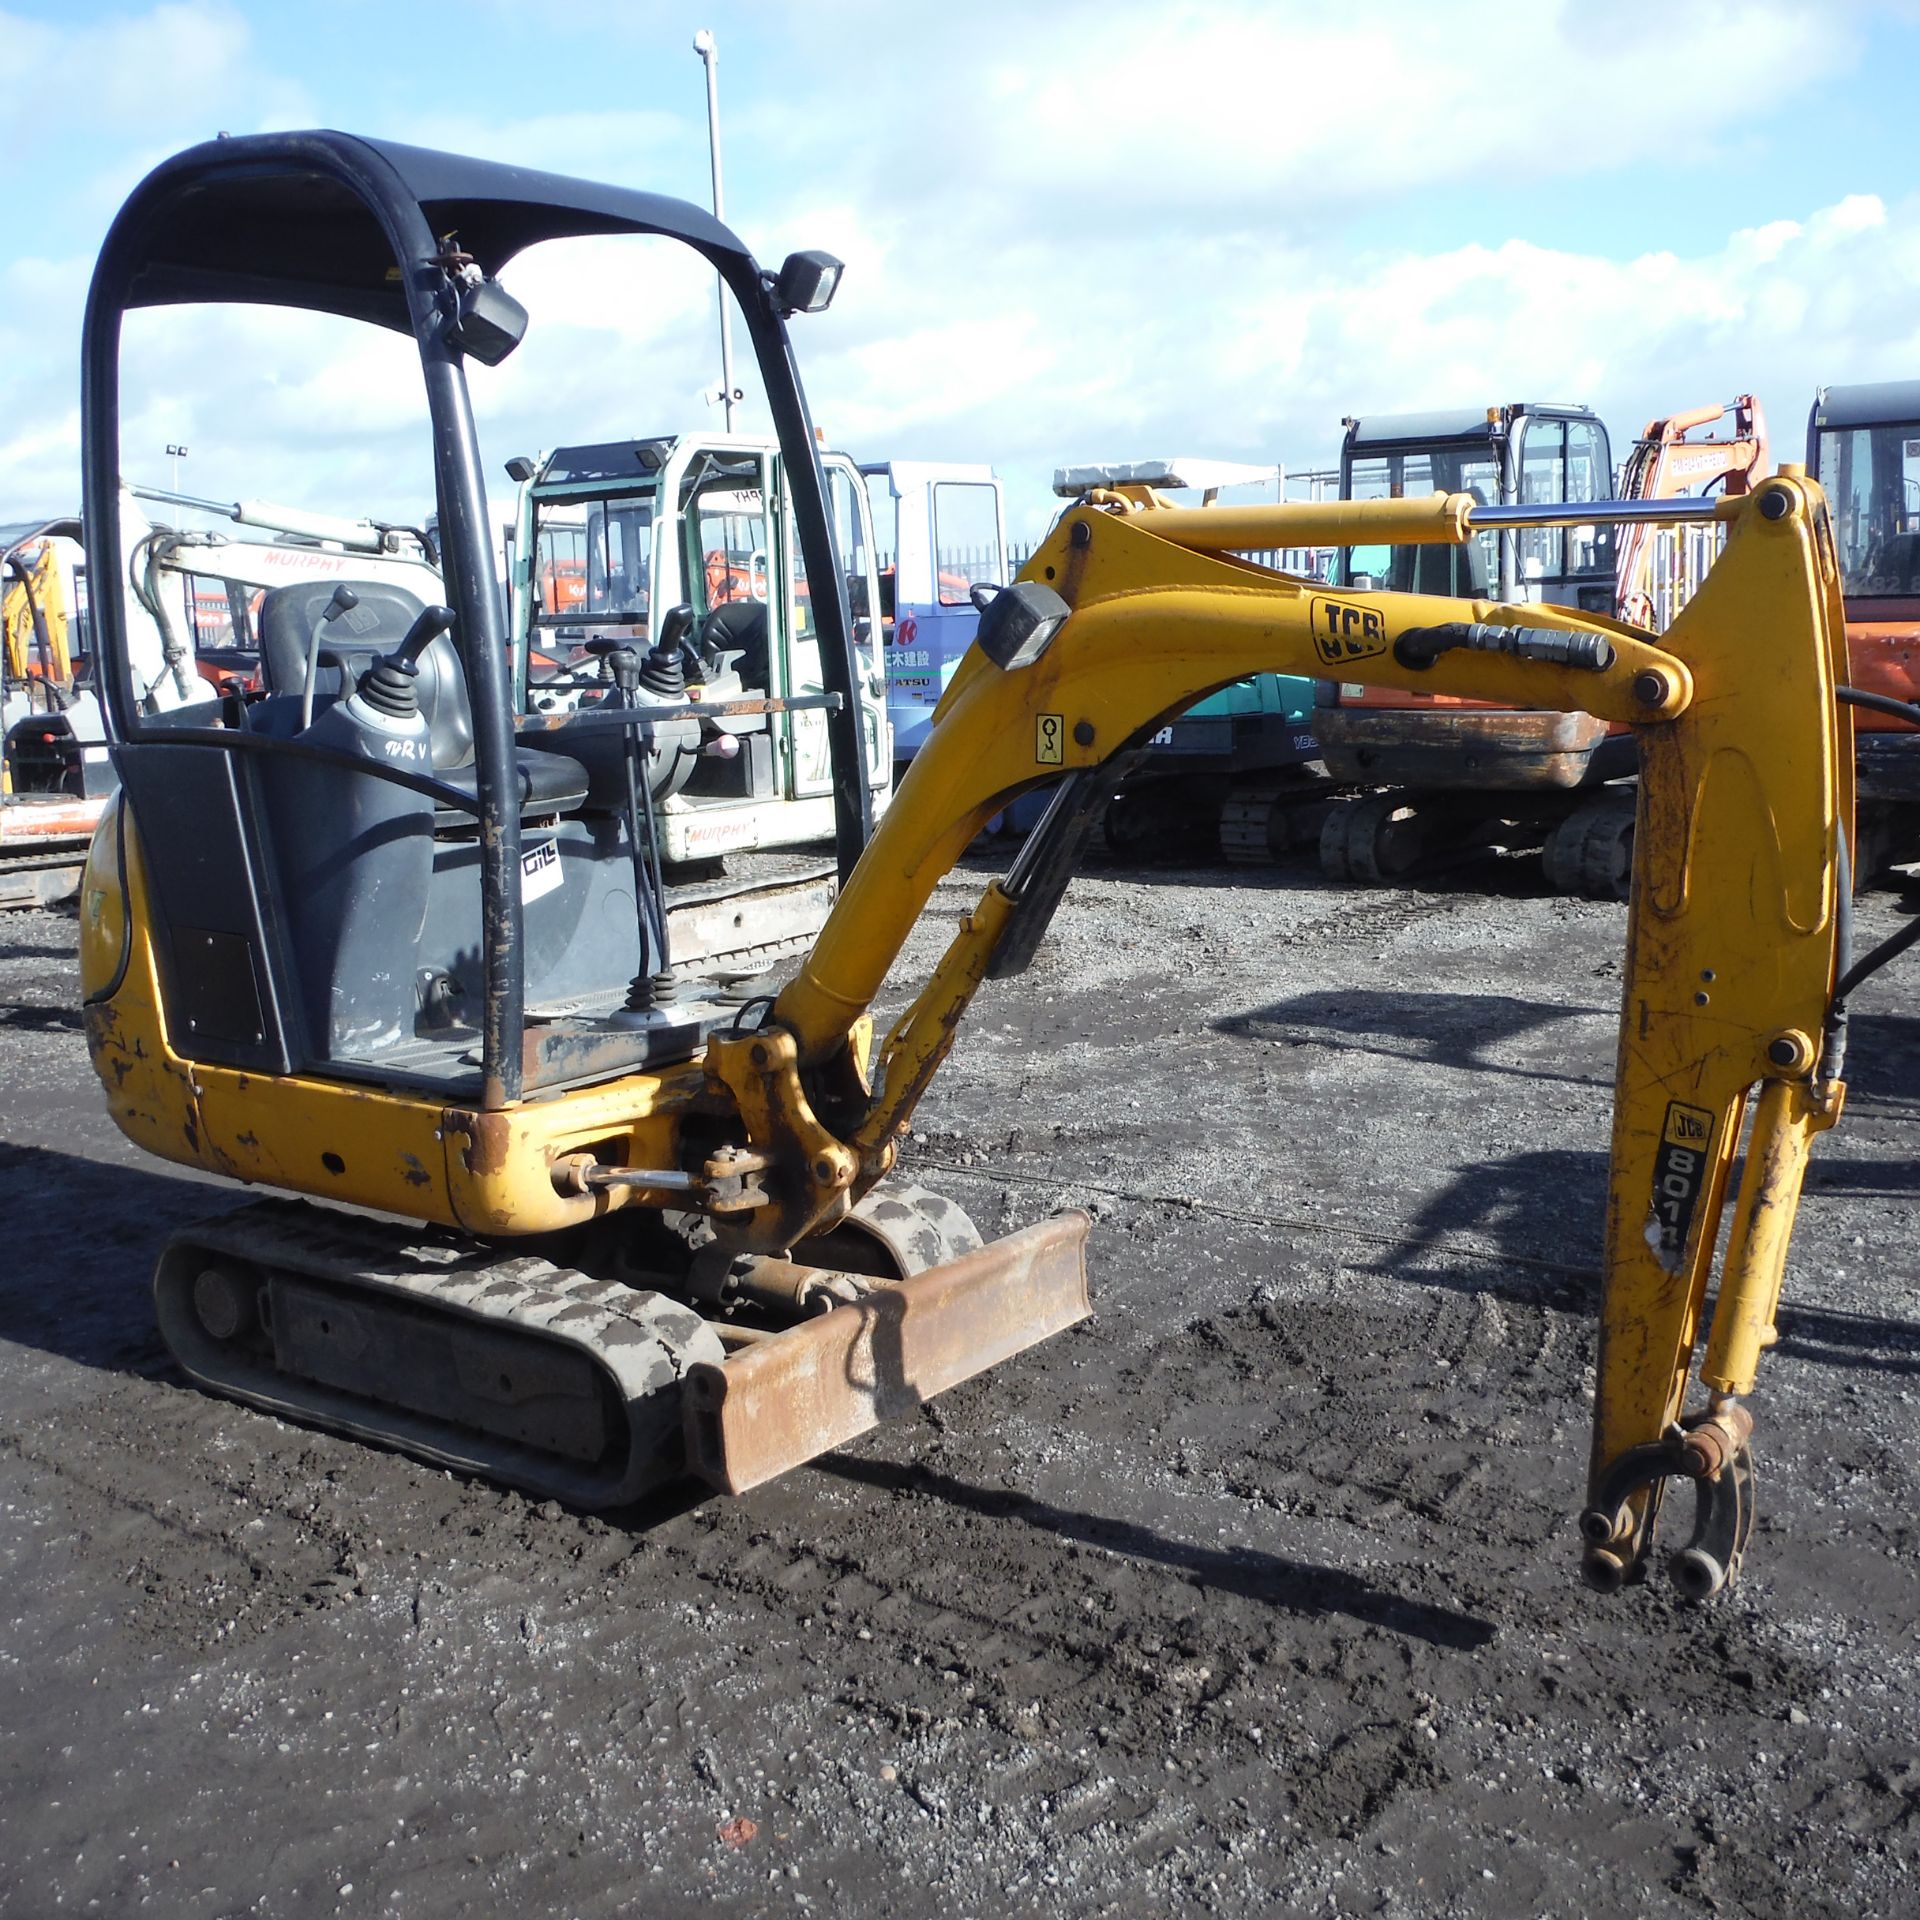 2008 JCB 801.4 rubber tracked excavator c/w blade & piped (1947 rec hrs)(RDD) - Image 2 of 4